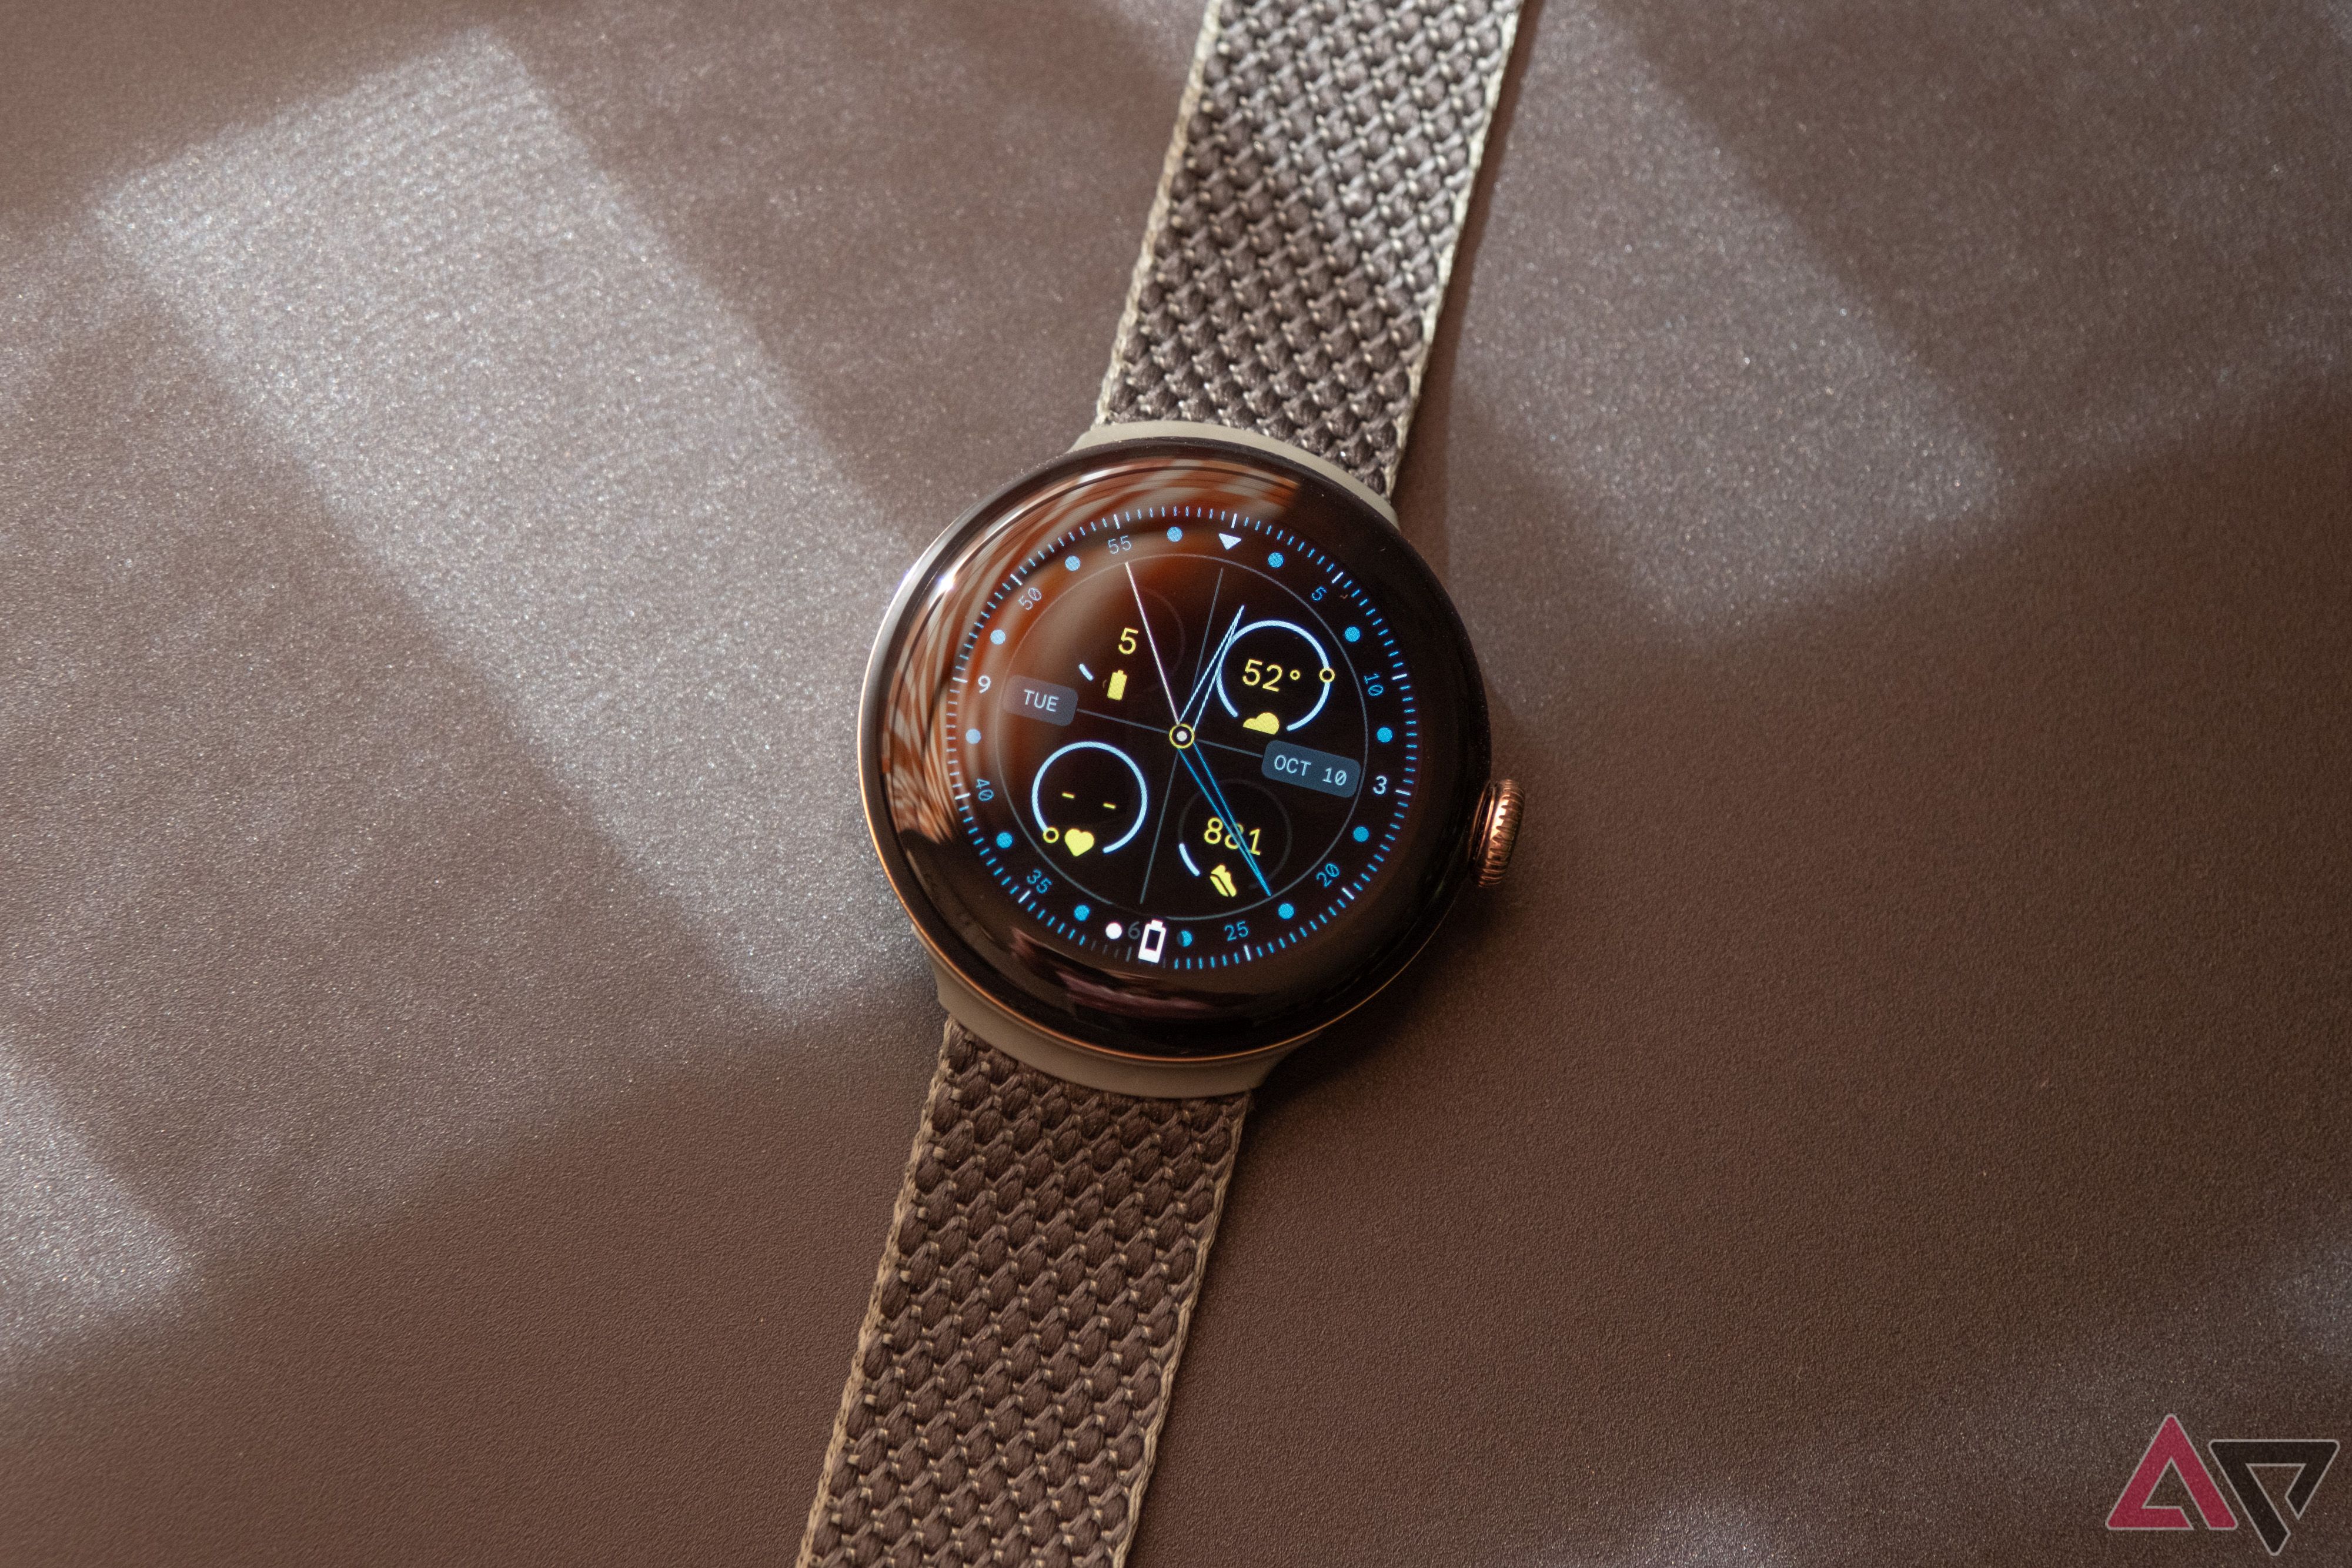 Pixel Watch 2 Is Going To Be So Sweet